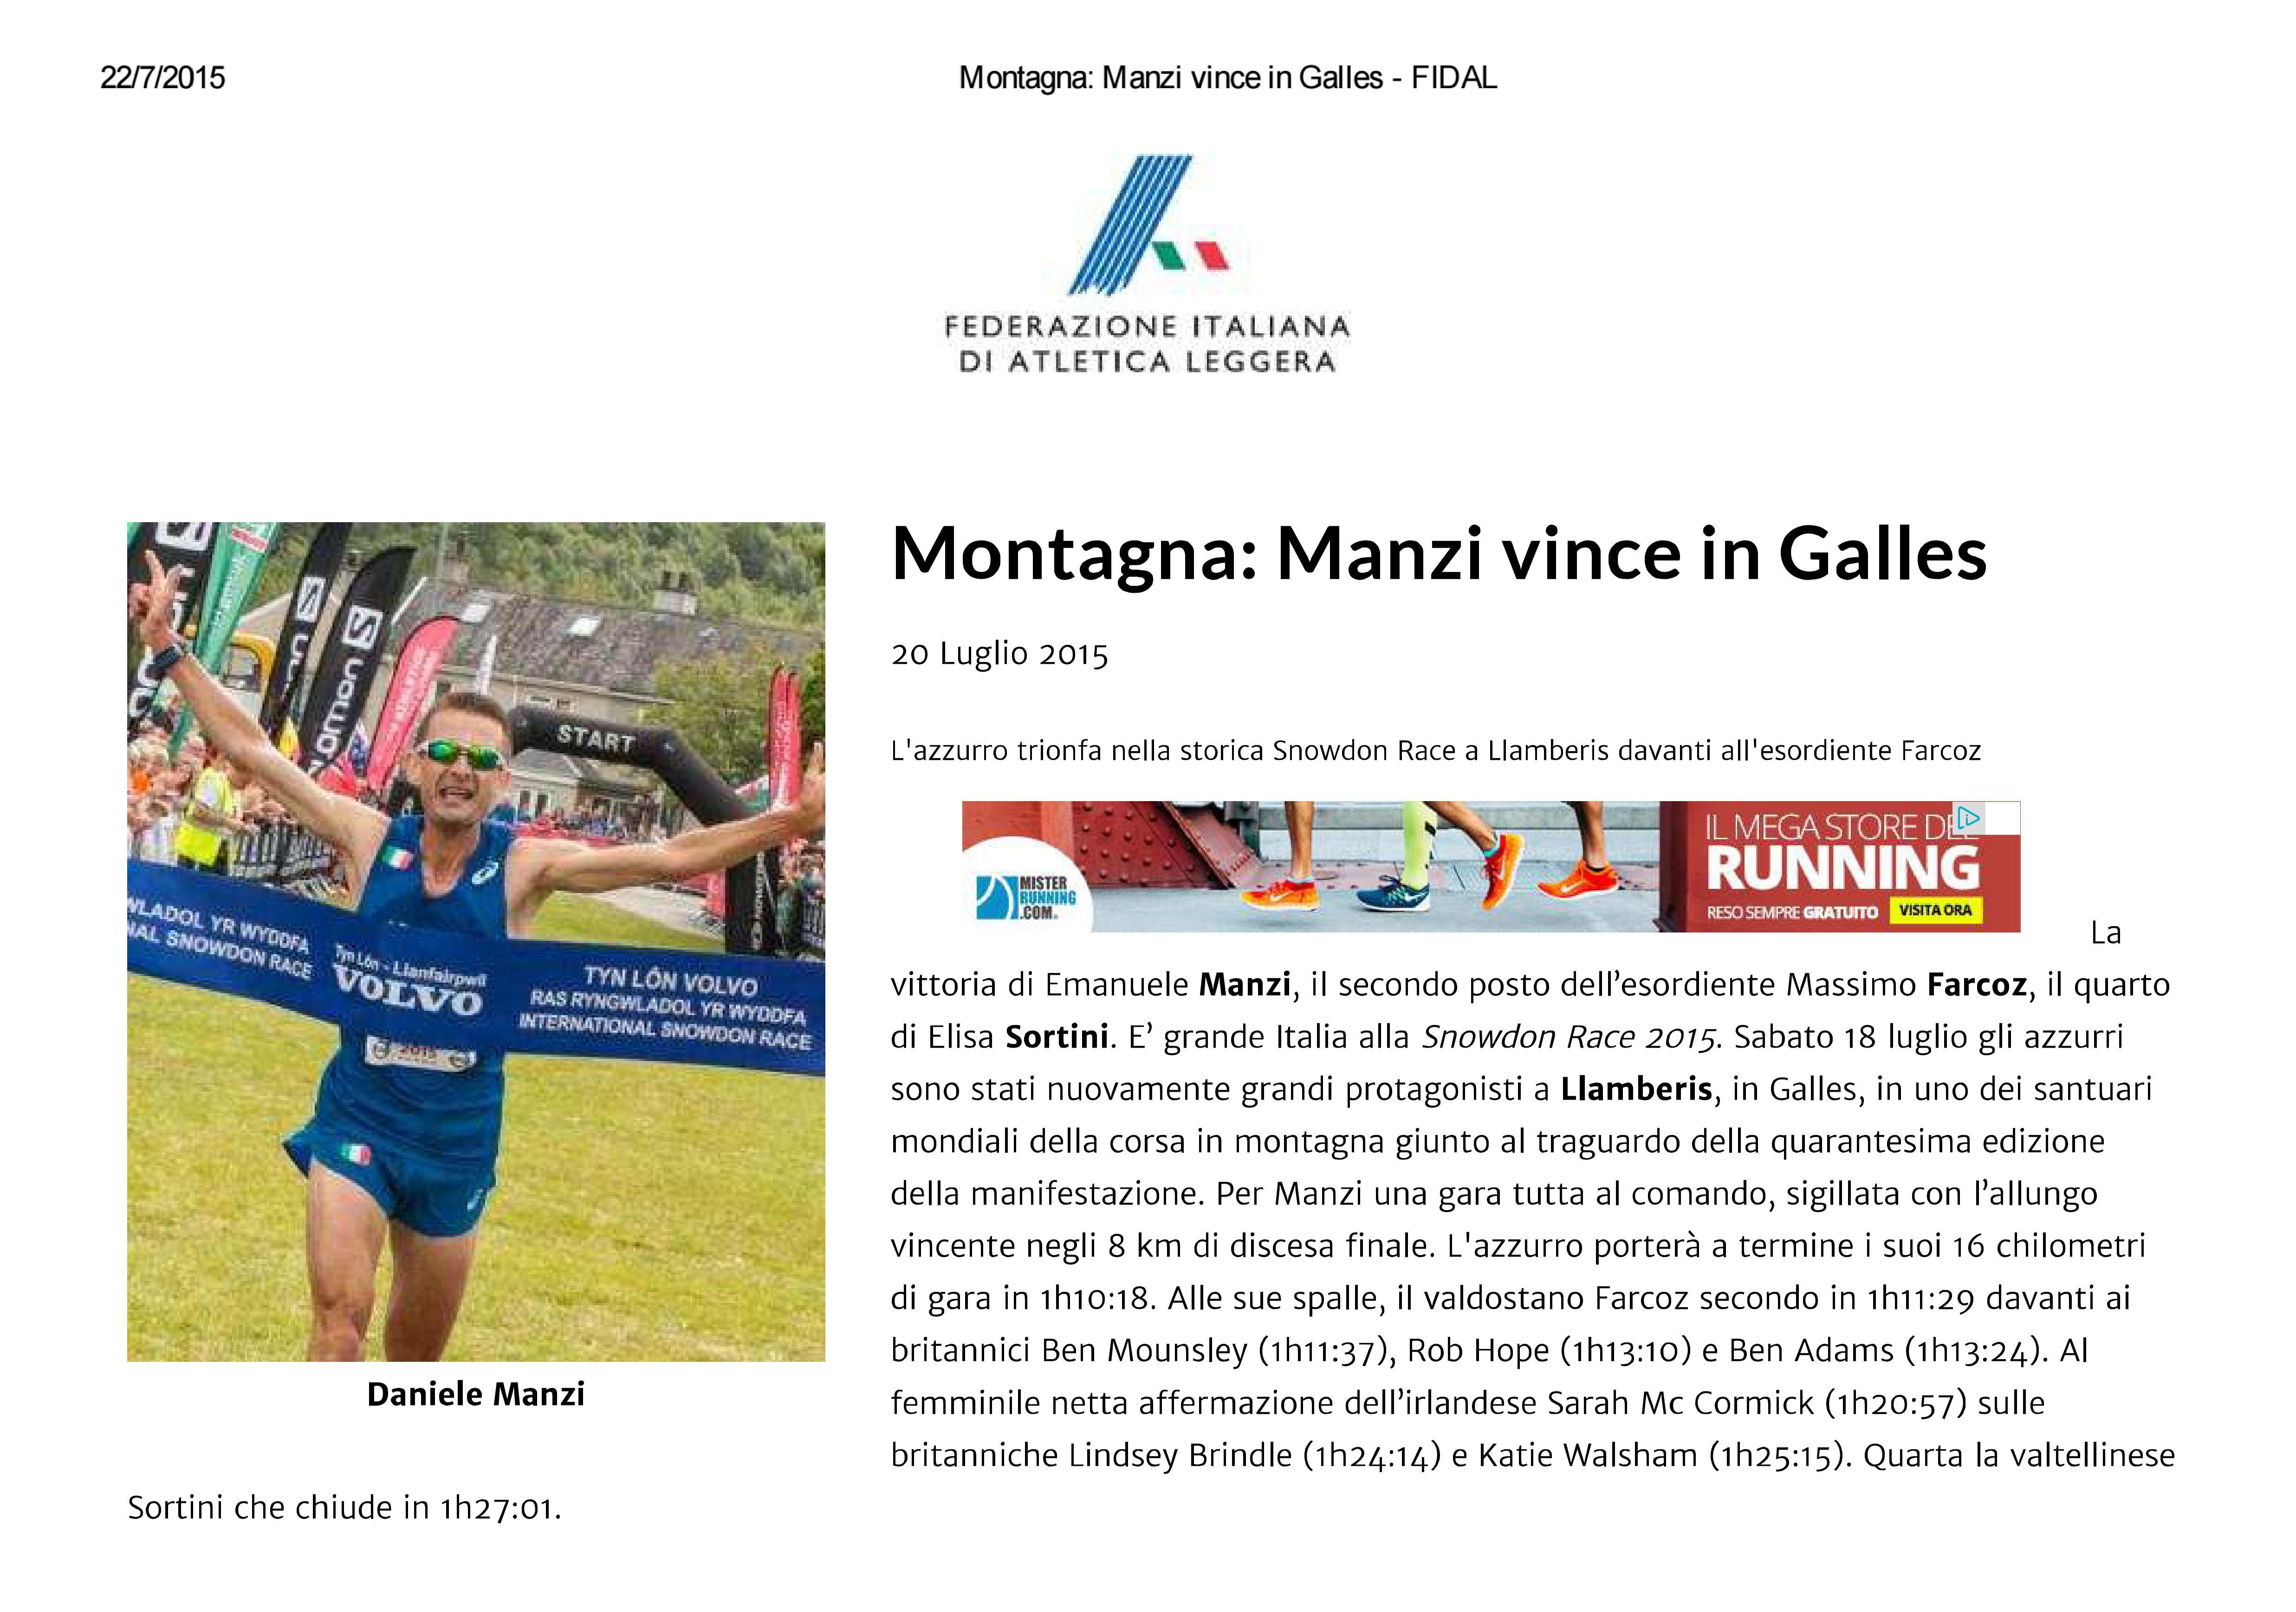 Manzi vince in galles